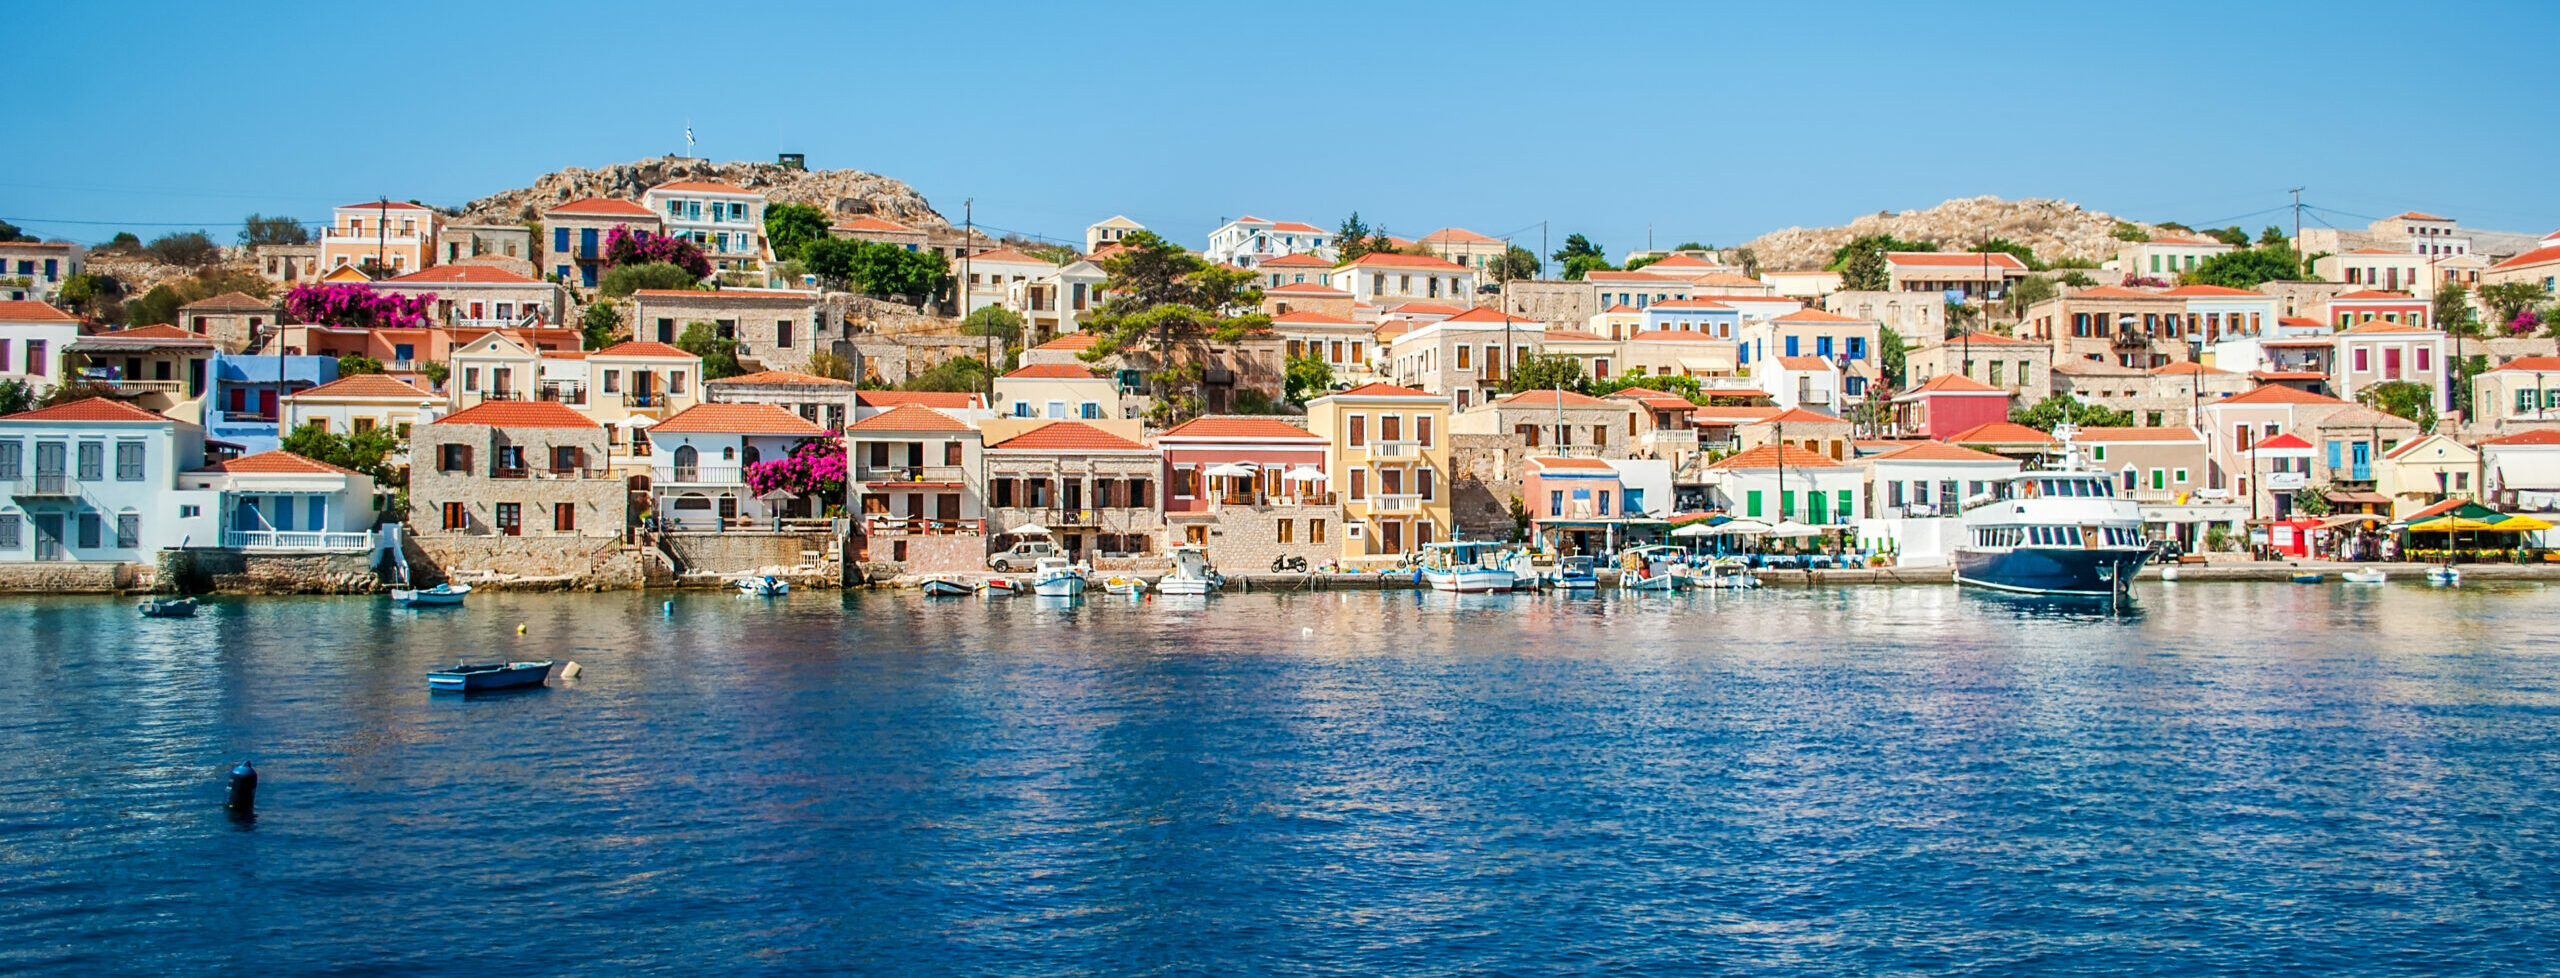 Chalki: The charming little paradise of the Dodecanese Islands